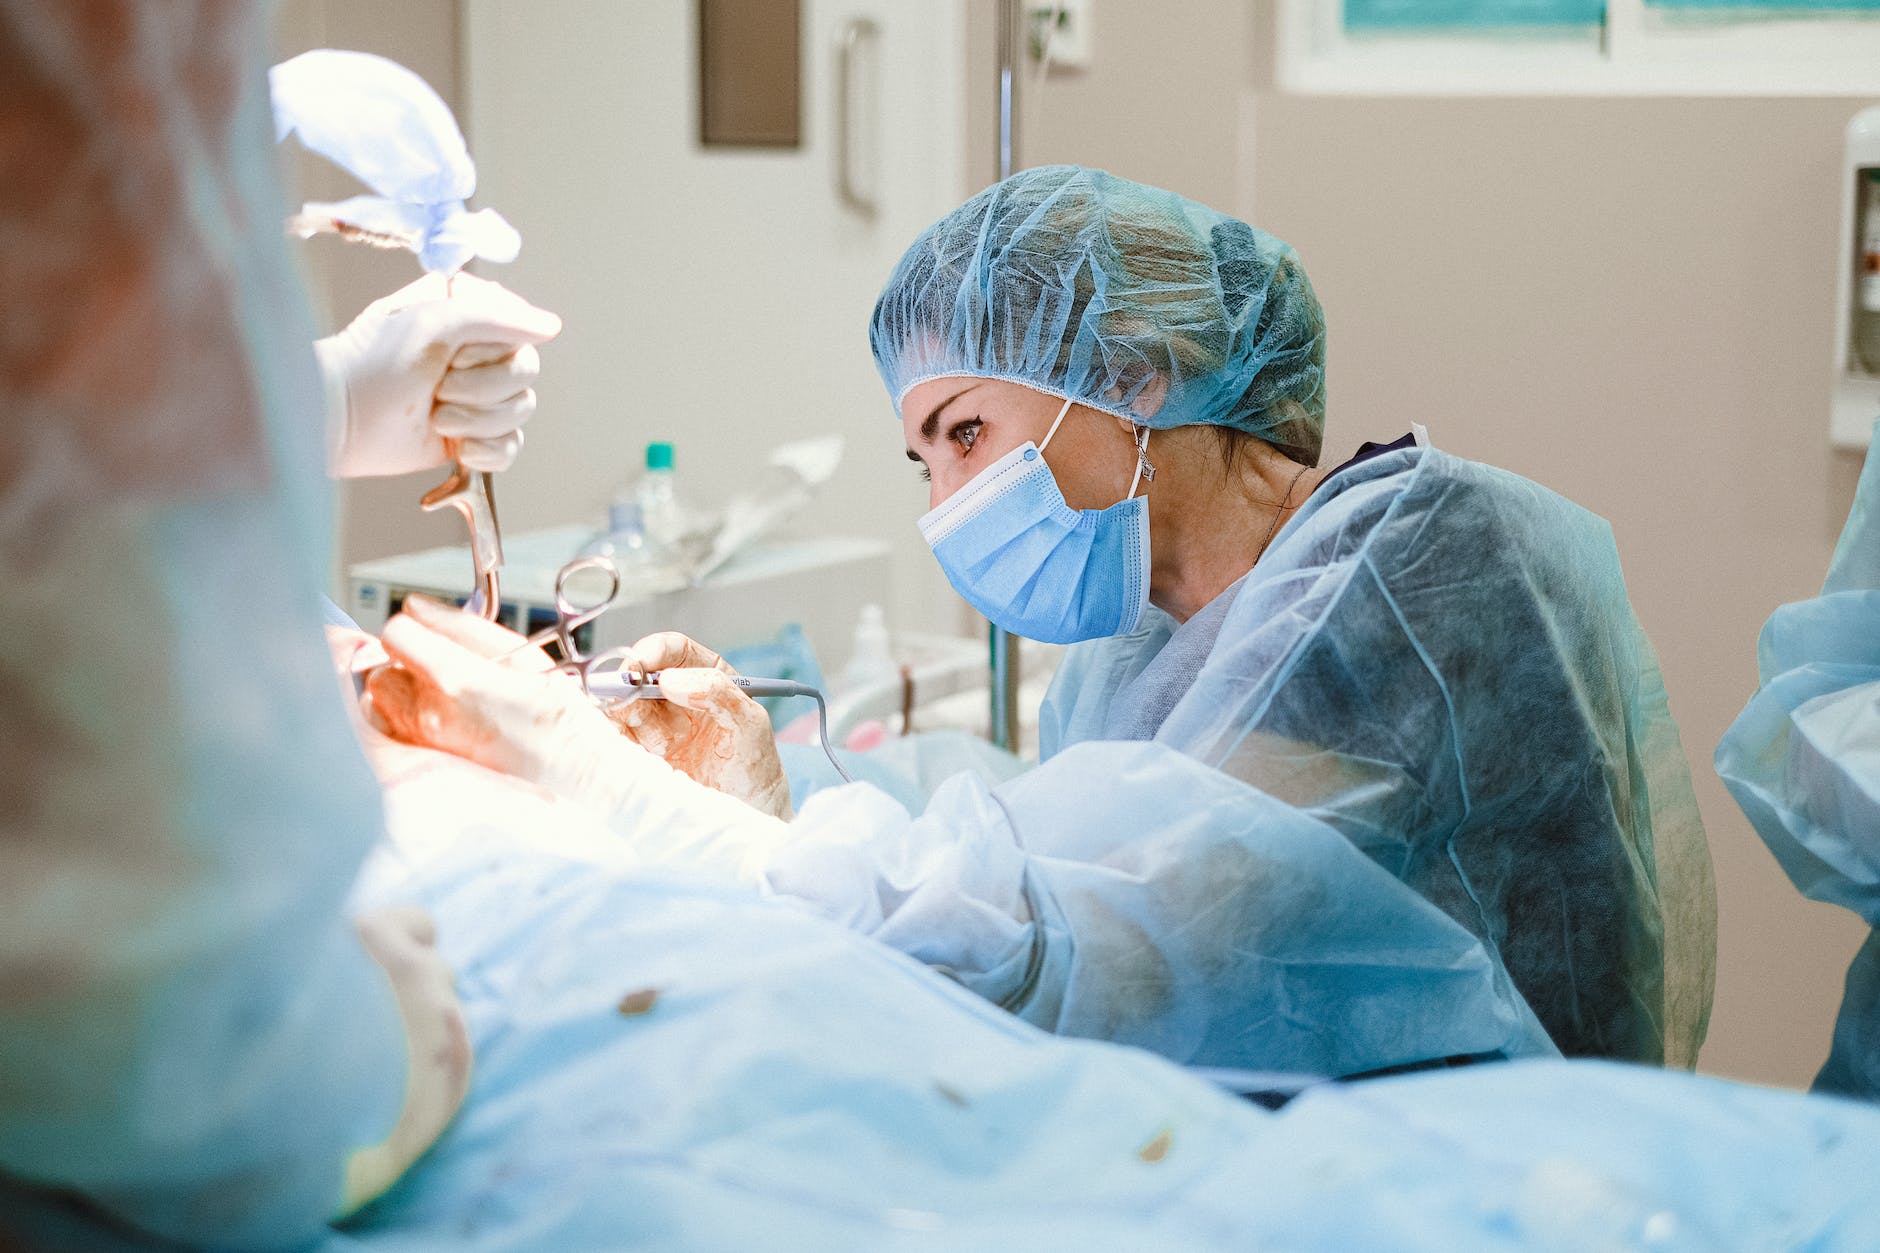 woman doing a surgery on a patient